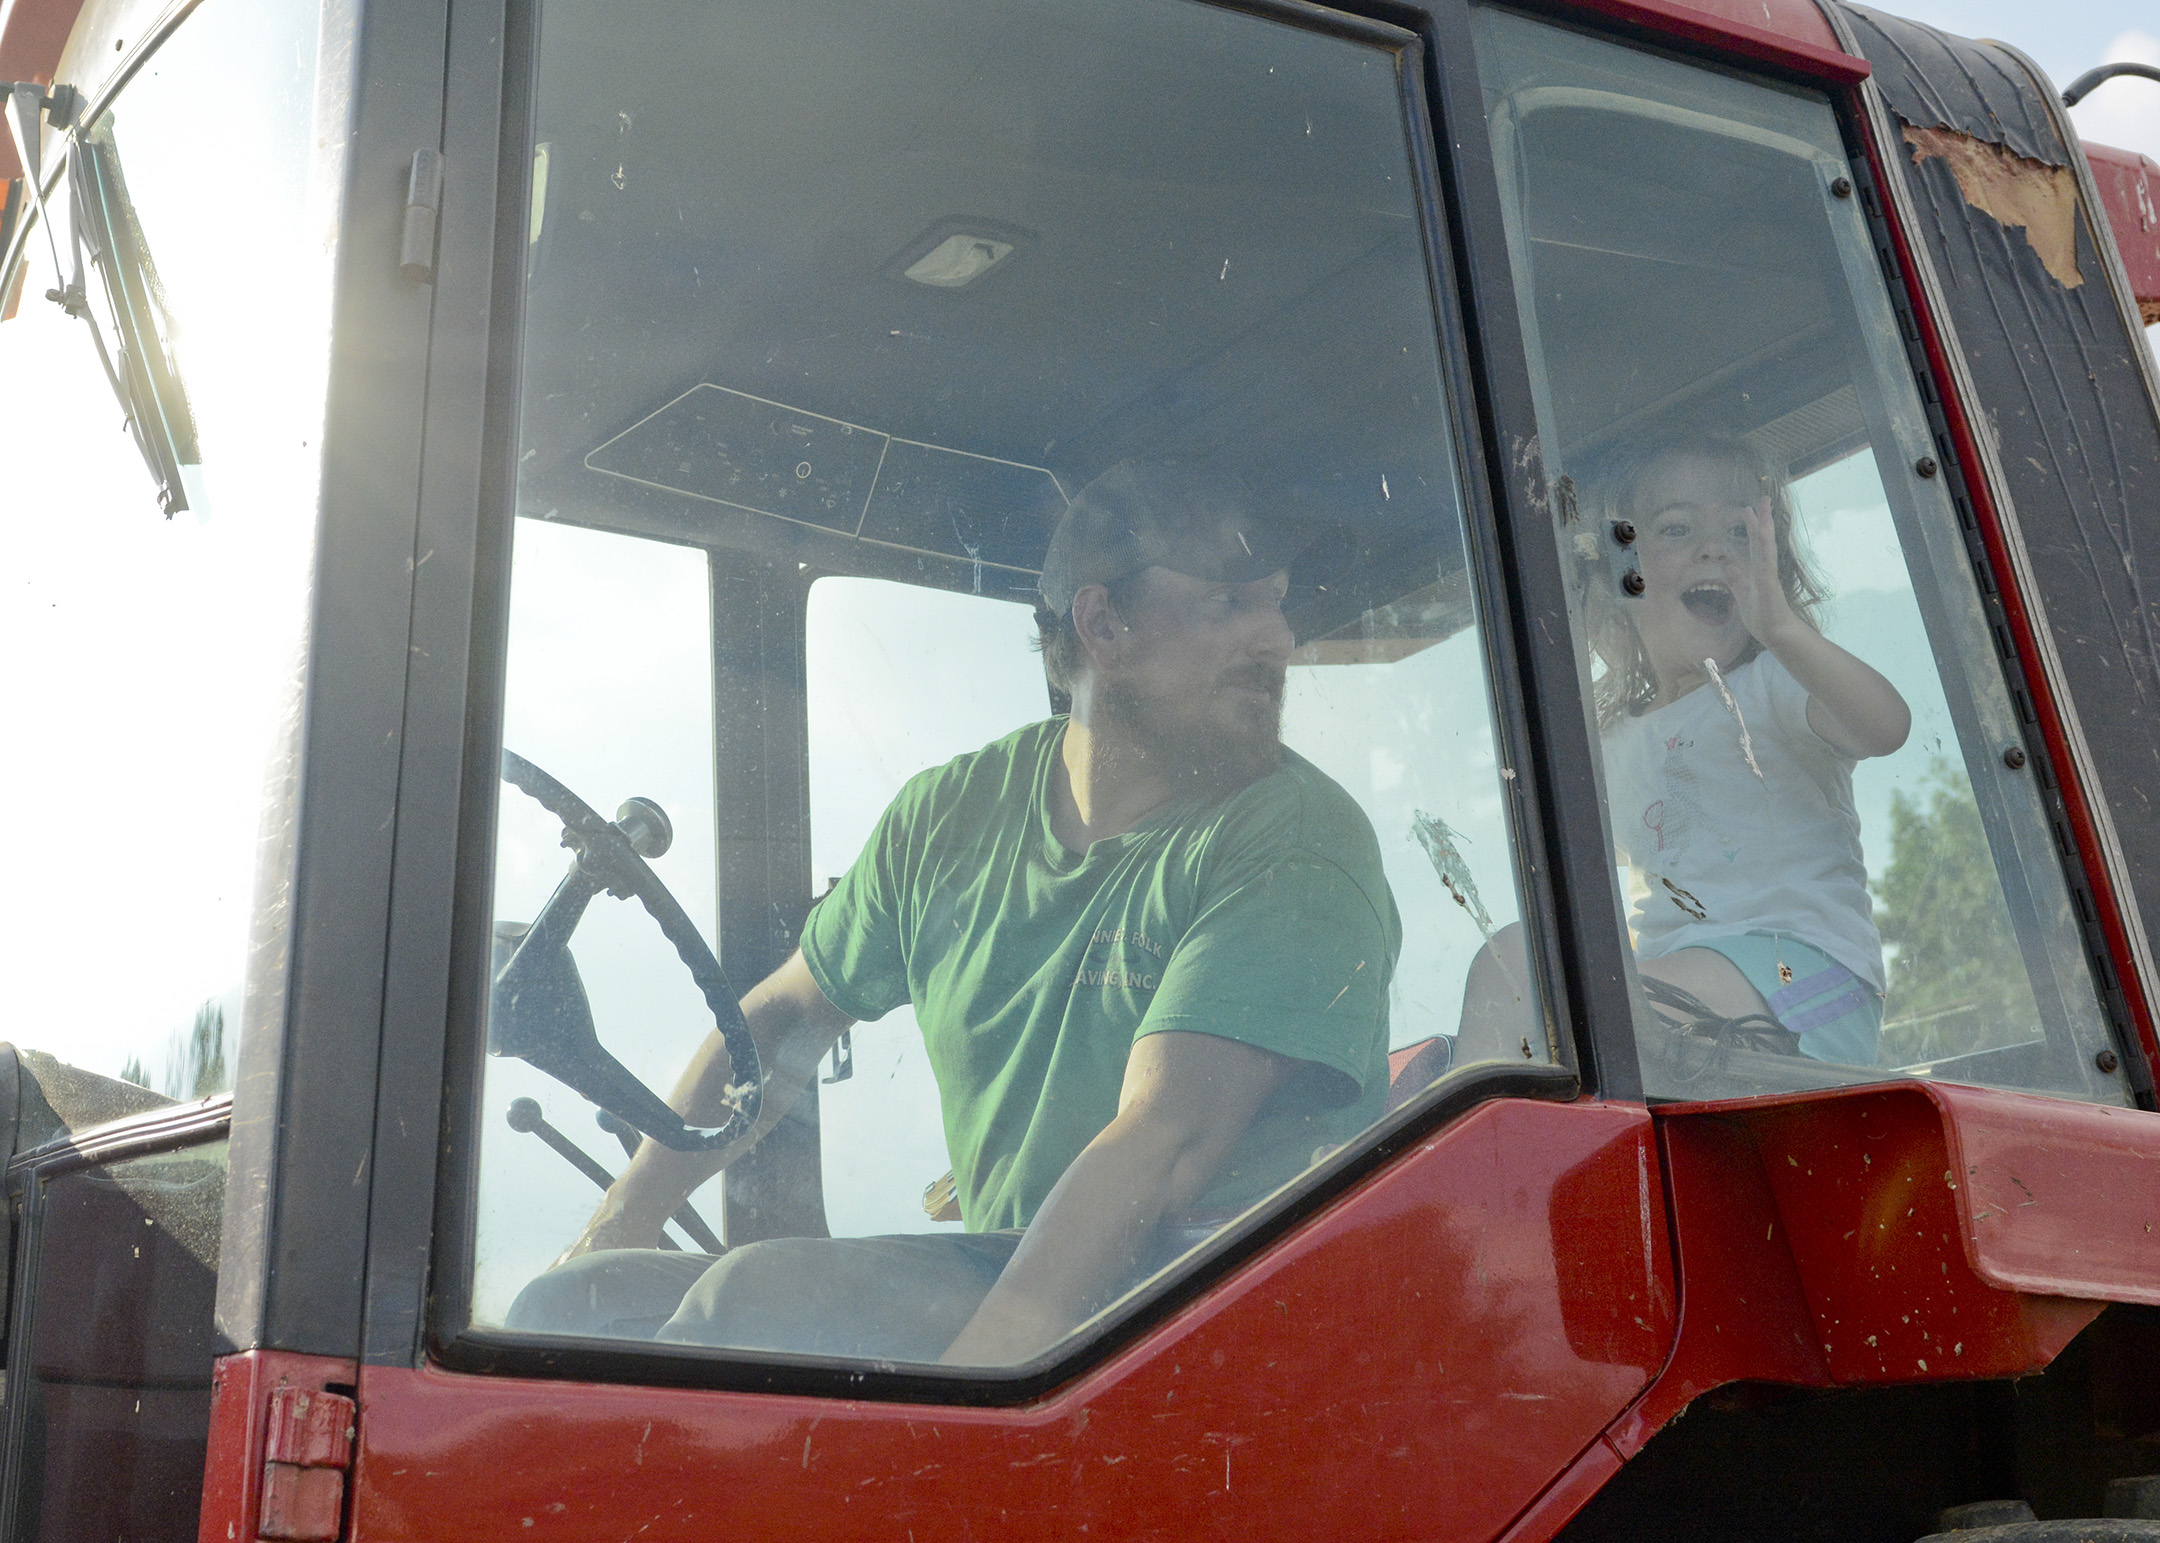  Lee Gauker of Fleetwood looks on while his daughter Callie, 2 1/2, waves goodbye to her mom in his tractor before riding around the fields at one of the Gauker Family's properties in Fleetwood. 